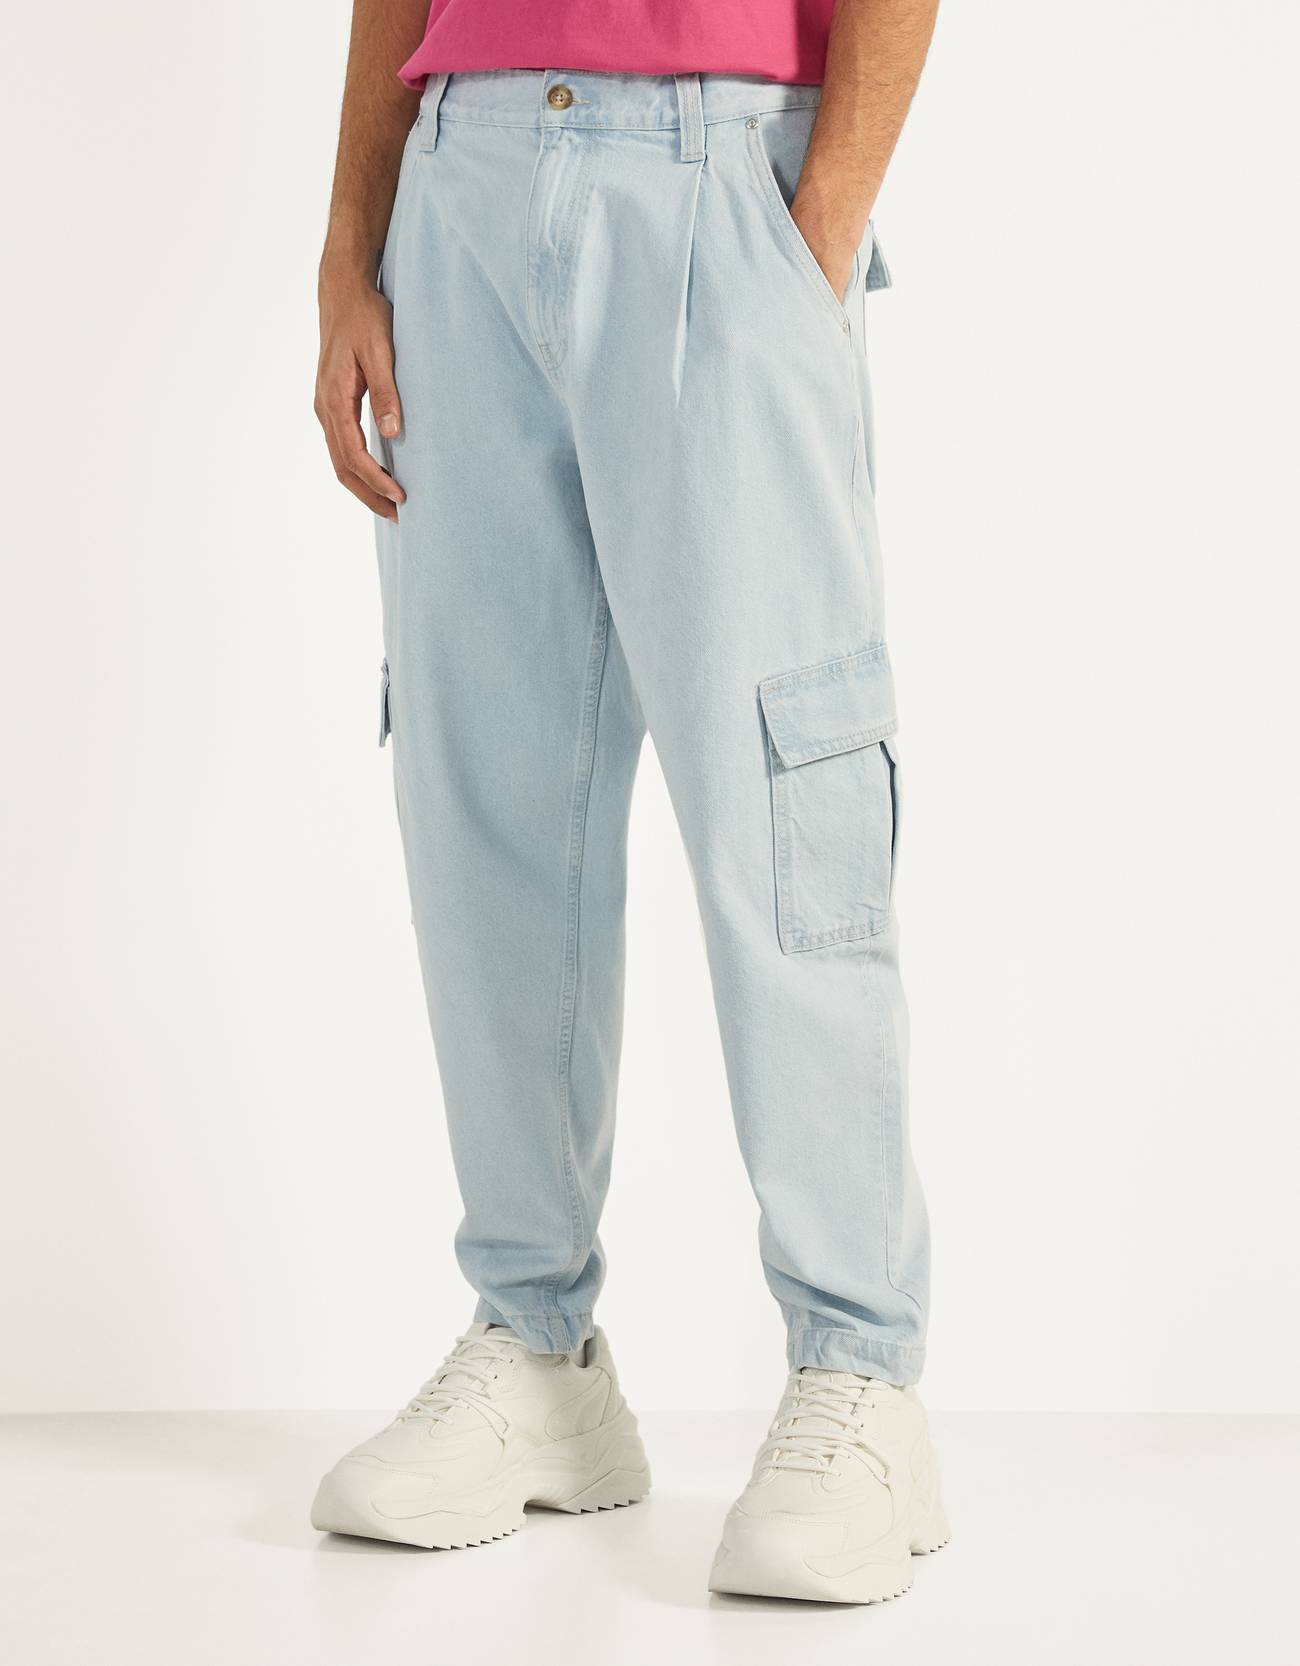 balloon fit pant jeans